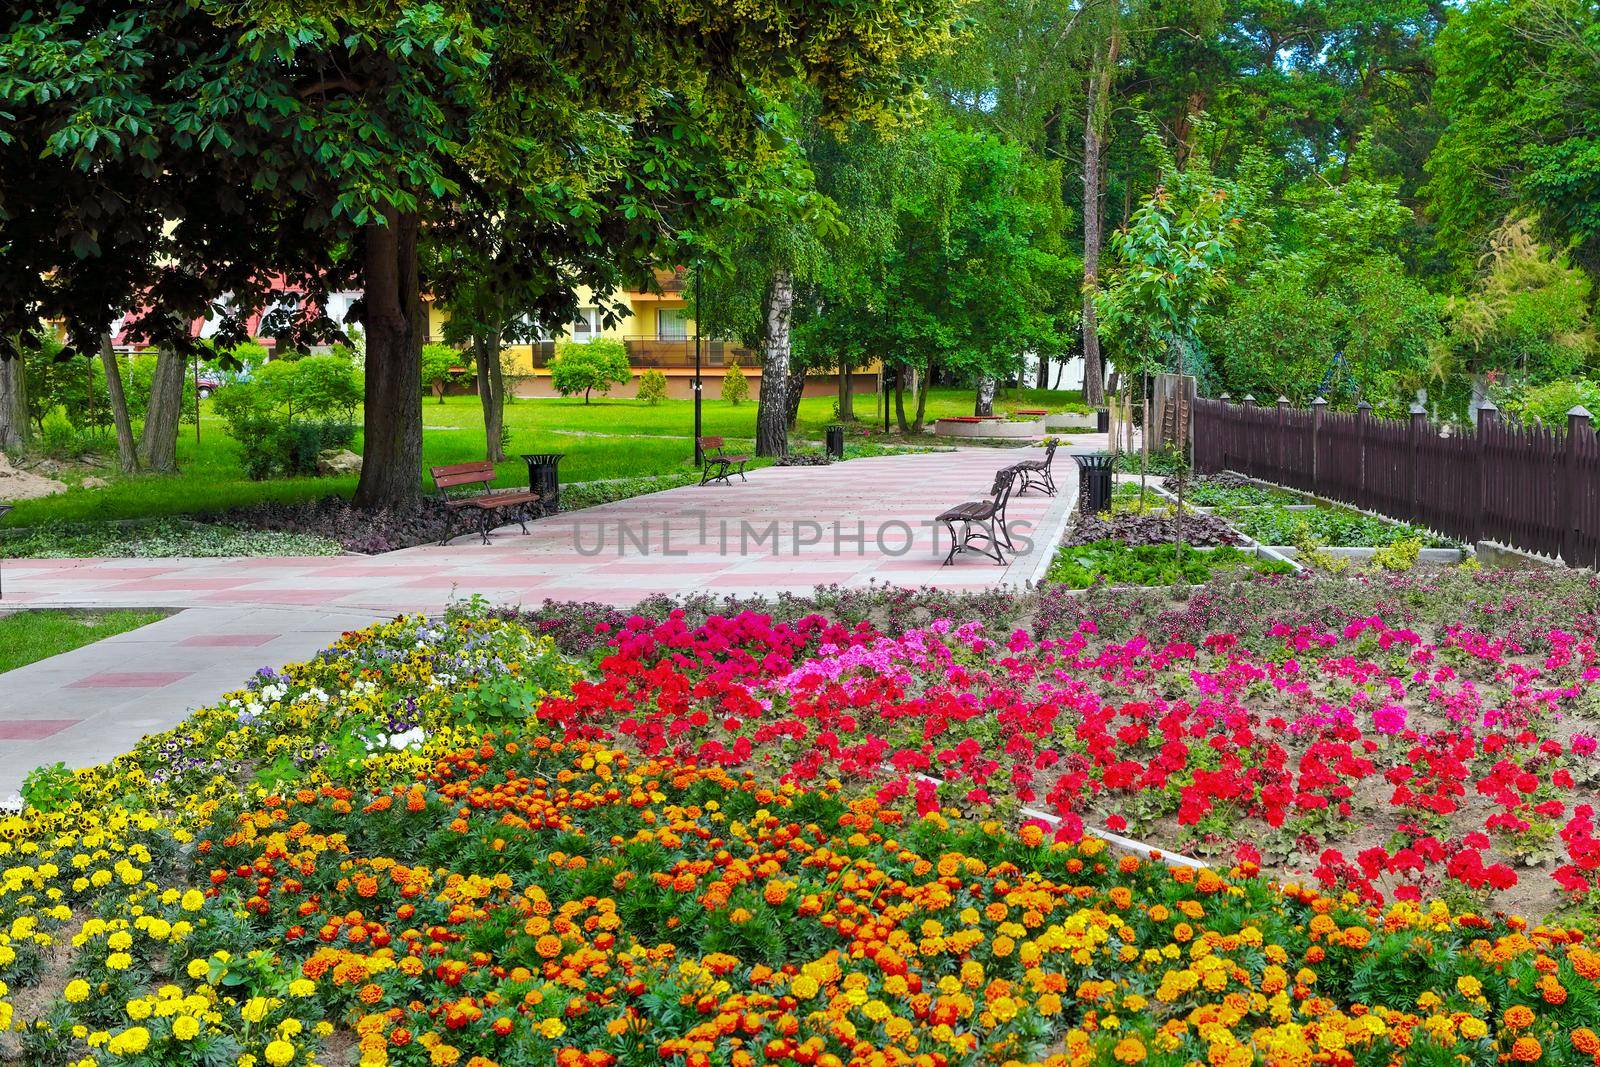 A colorful summer park in the city